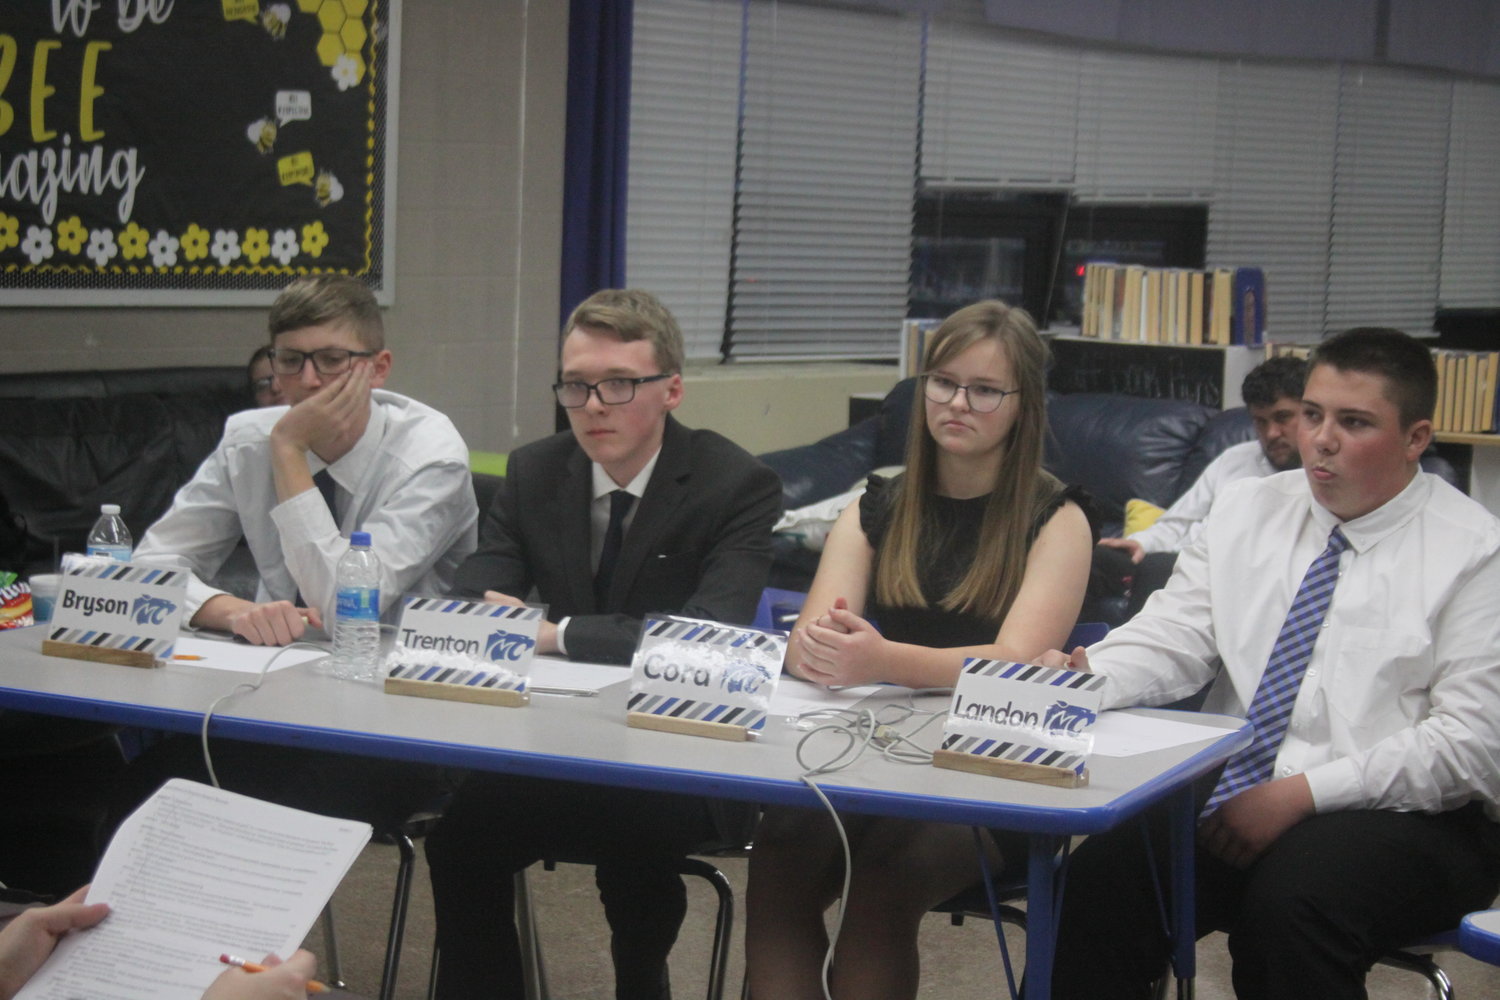 The Montgomery County Scholar Bowl team of Bryson Nichols, Trenton Moose, Cora Johnson and Landon Pottebaum listens to a question during a match against Van-Far on Jan. 10. MCHS defeated both Van-Far and Wright City.